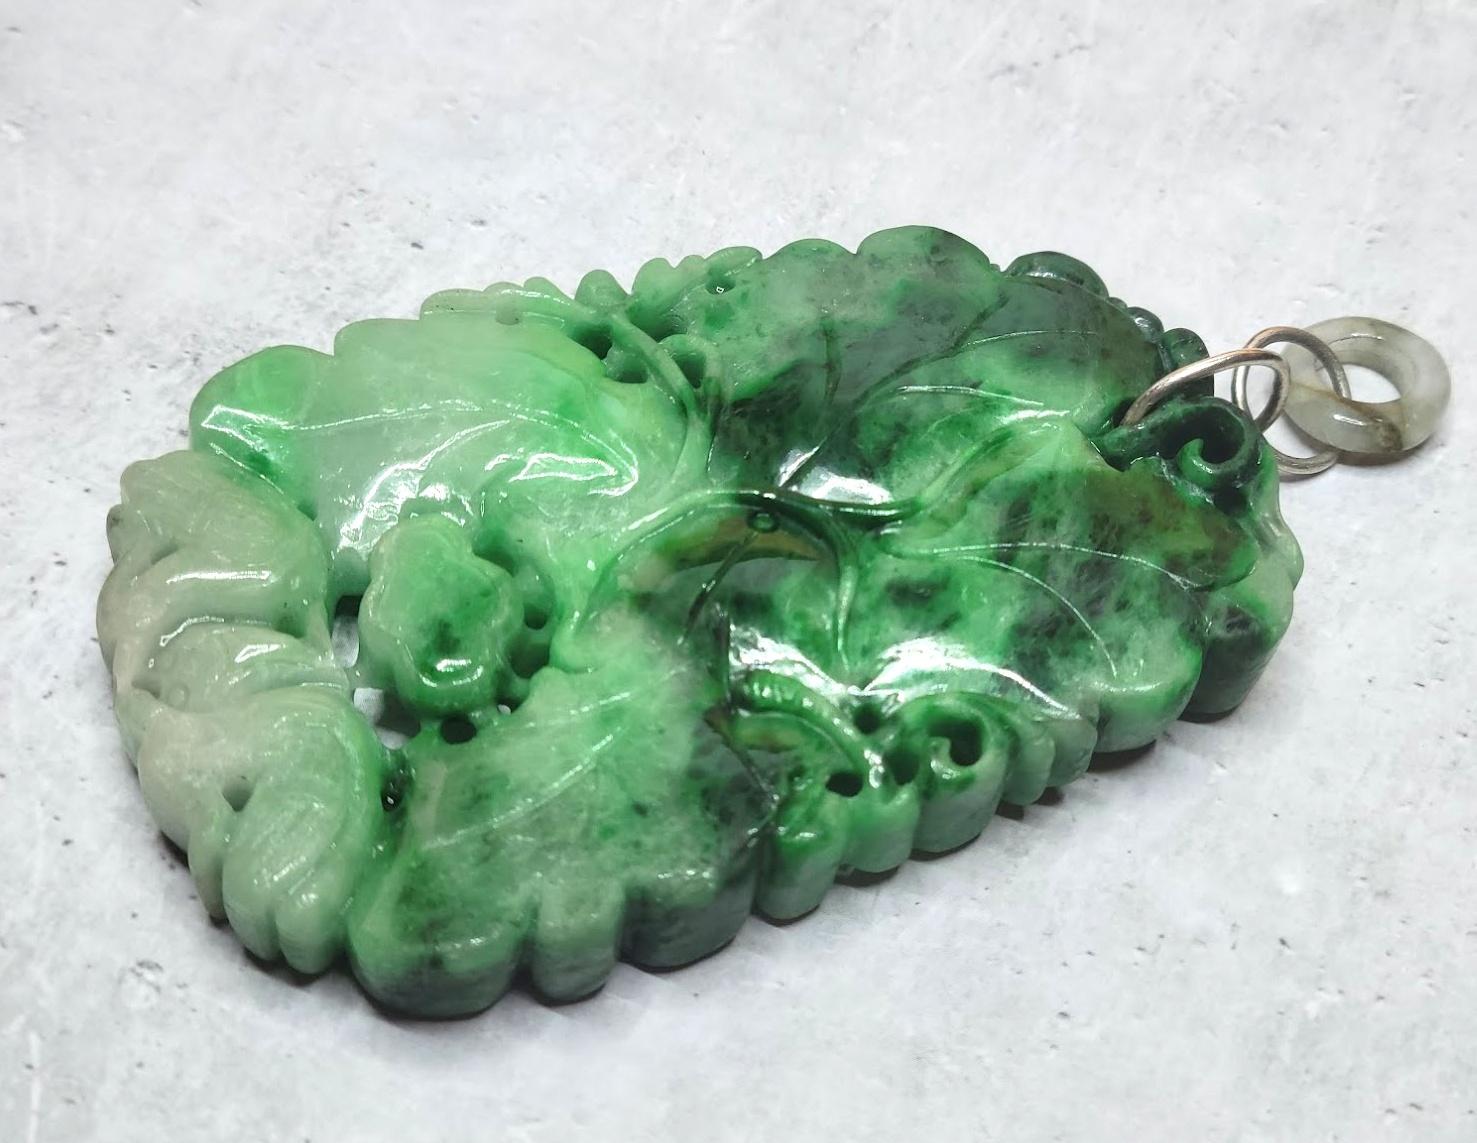 A very large hand-carved natural untreated Burmese jade pendant circa the late 18th to early 19th century Qing Dynasty. A very rare and unique size!

China directly controlled the Central Asian jade-yielding regions of Hotan and Yarkand between